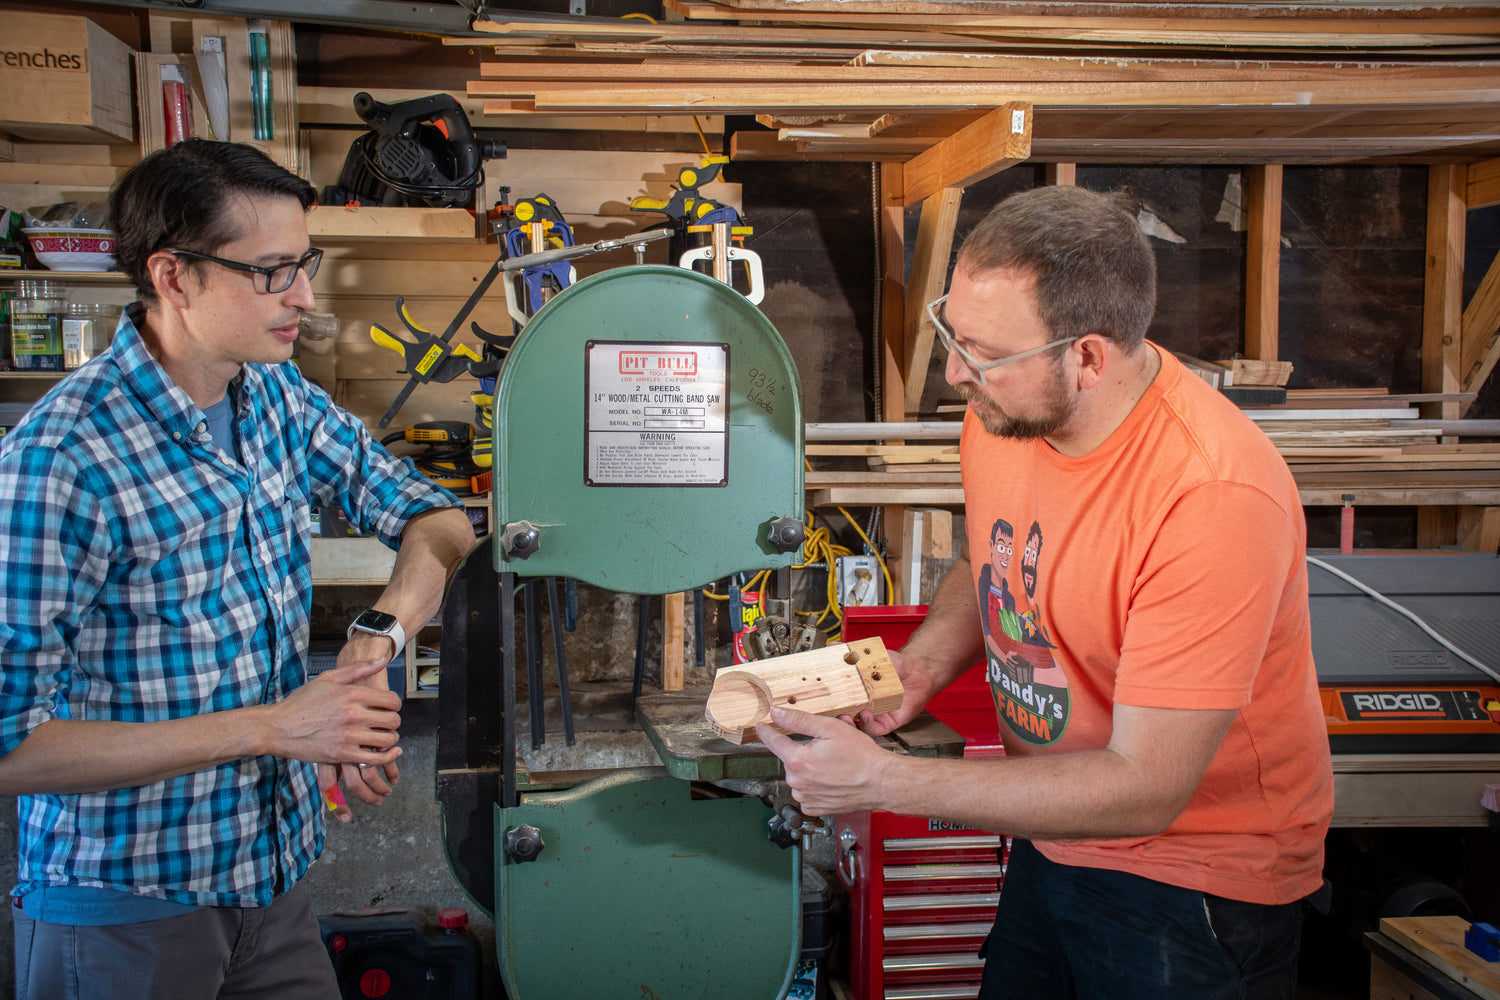 Dan teaching how to use the bandsaw.